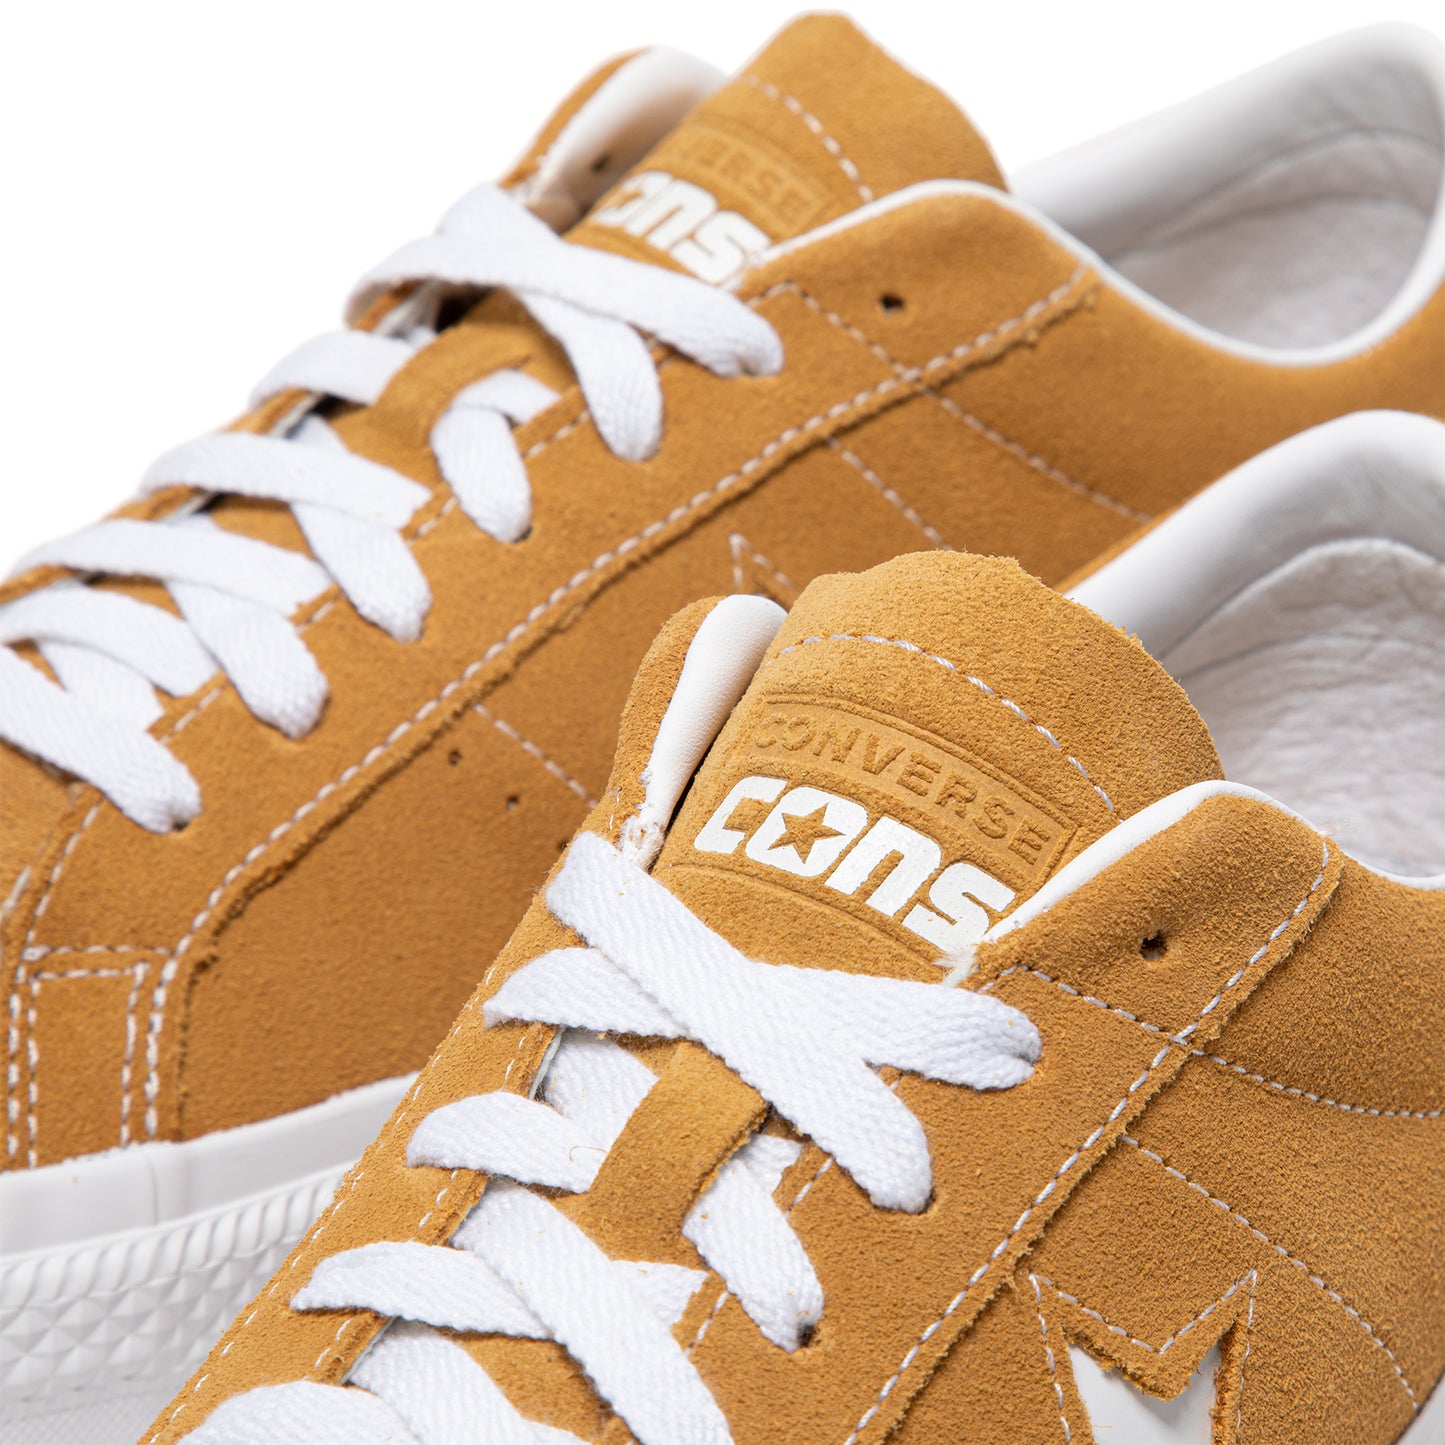 Converse CONS Classic Suede One Star Pro (Wheat/White/Black)